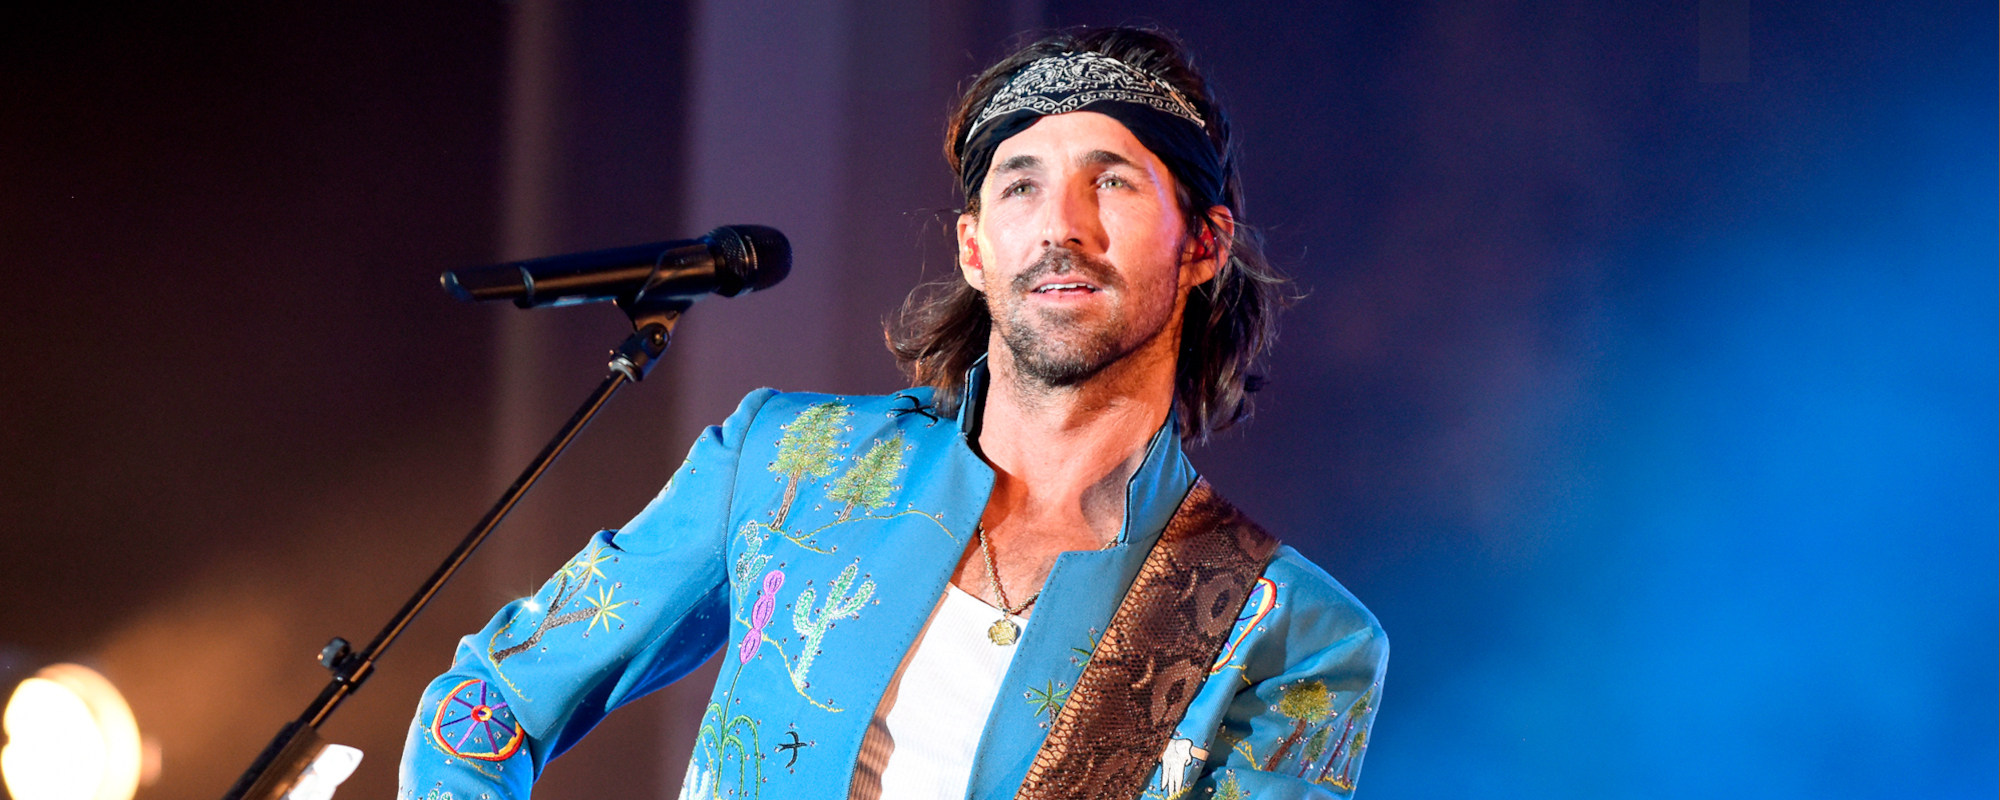 Jake Owen on New Music at Live In The Vineyard Goes Country: “There Is a Full Project Coming”